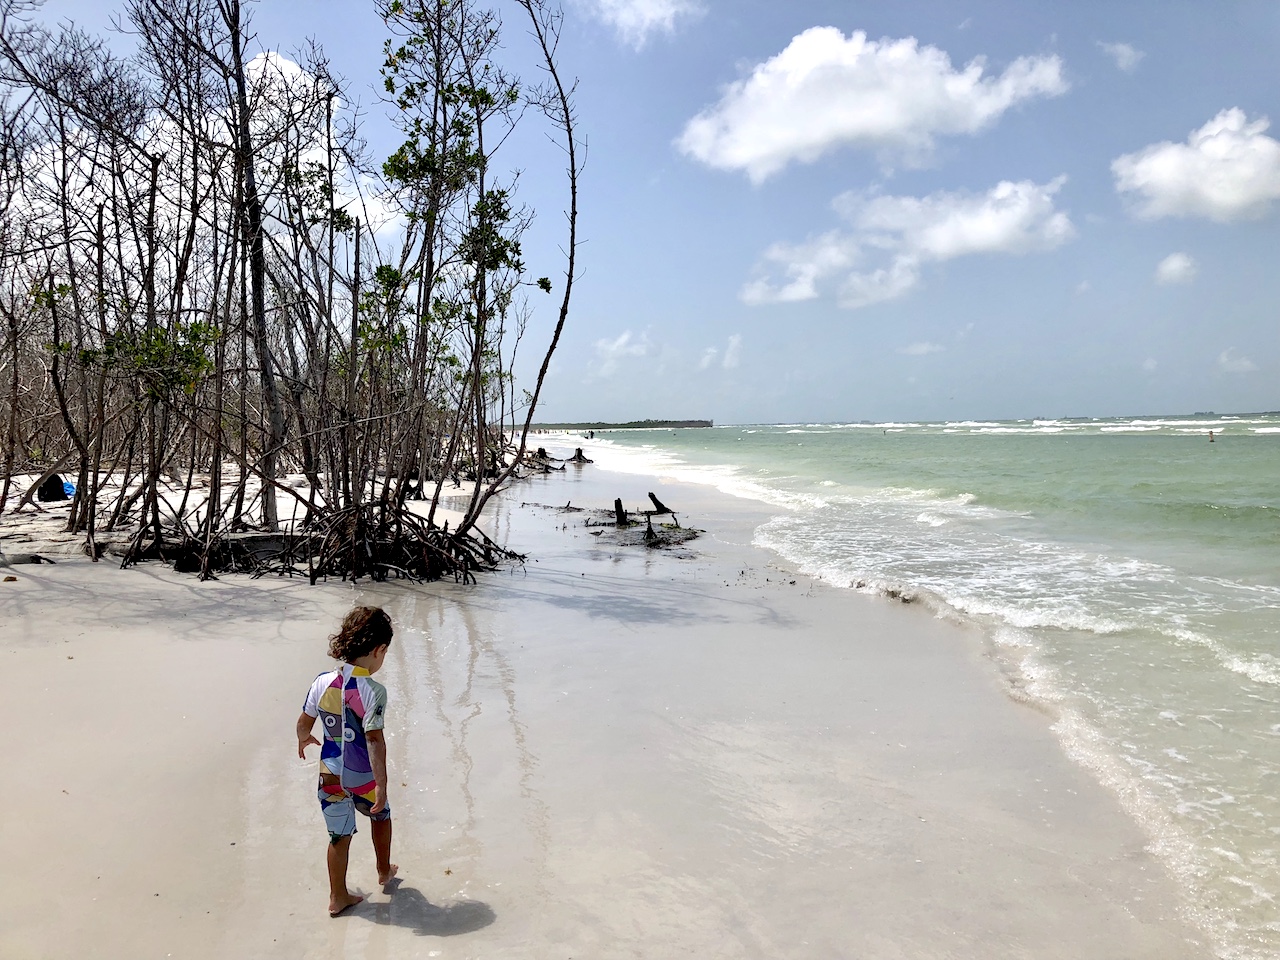 Fort de Soto Beach is a very natural beaches with no buildings in the background, but a wonderful nature and fauna